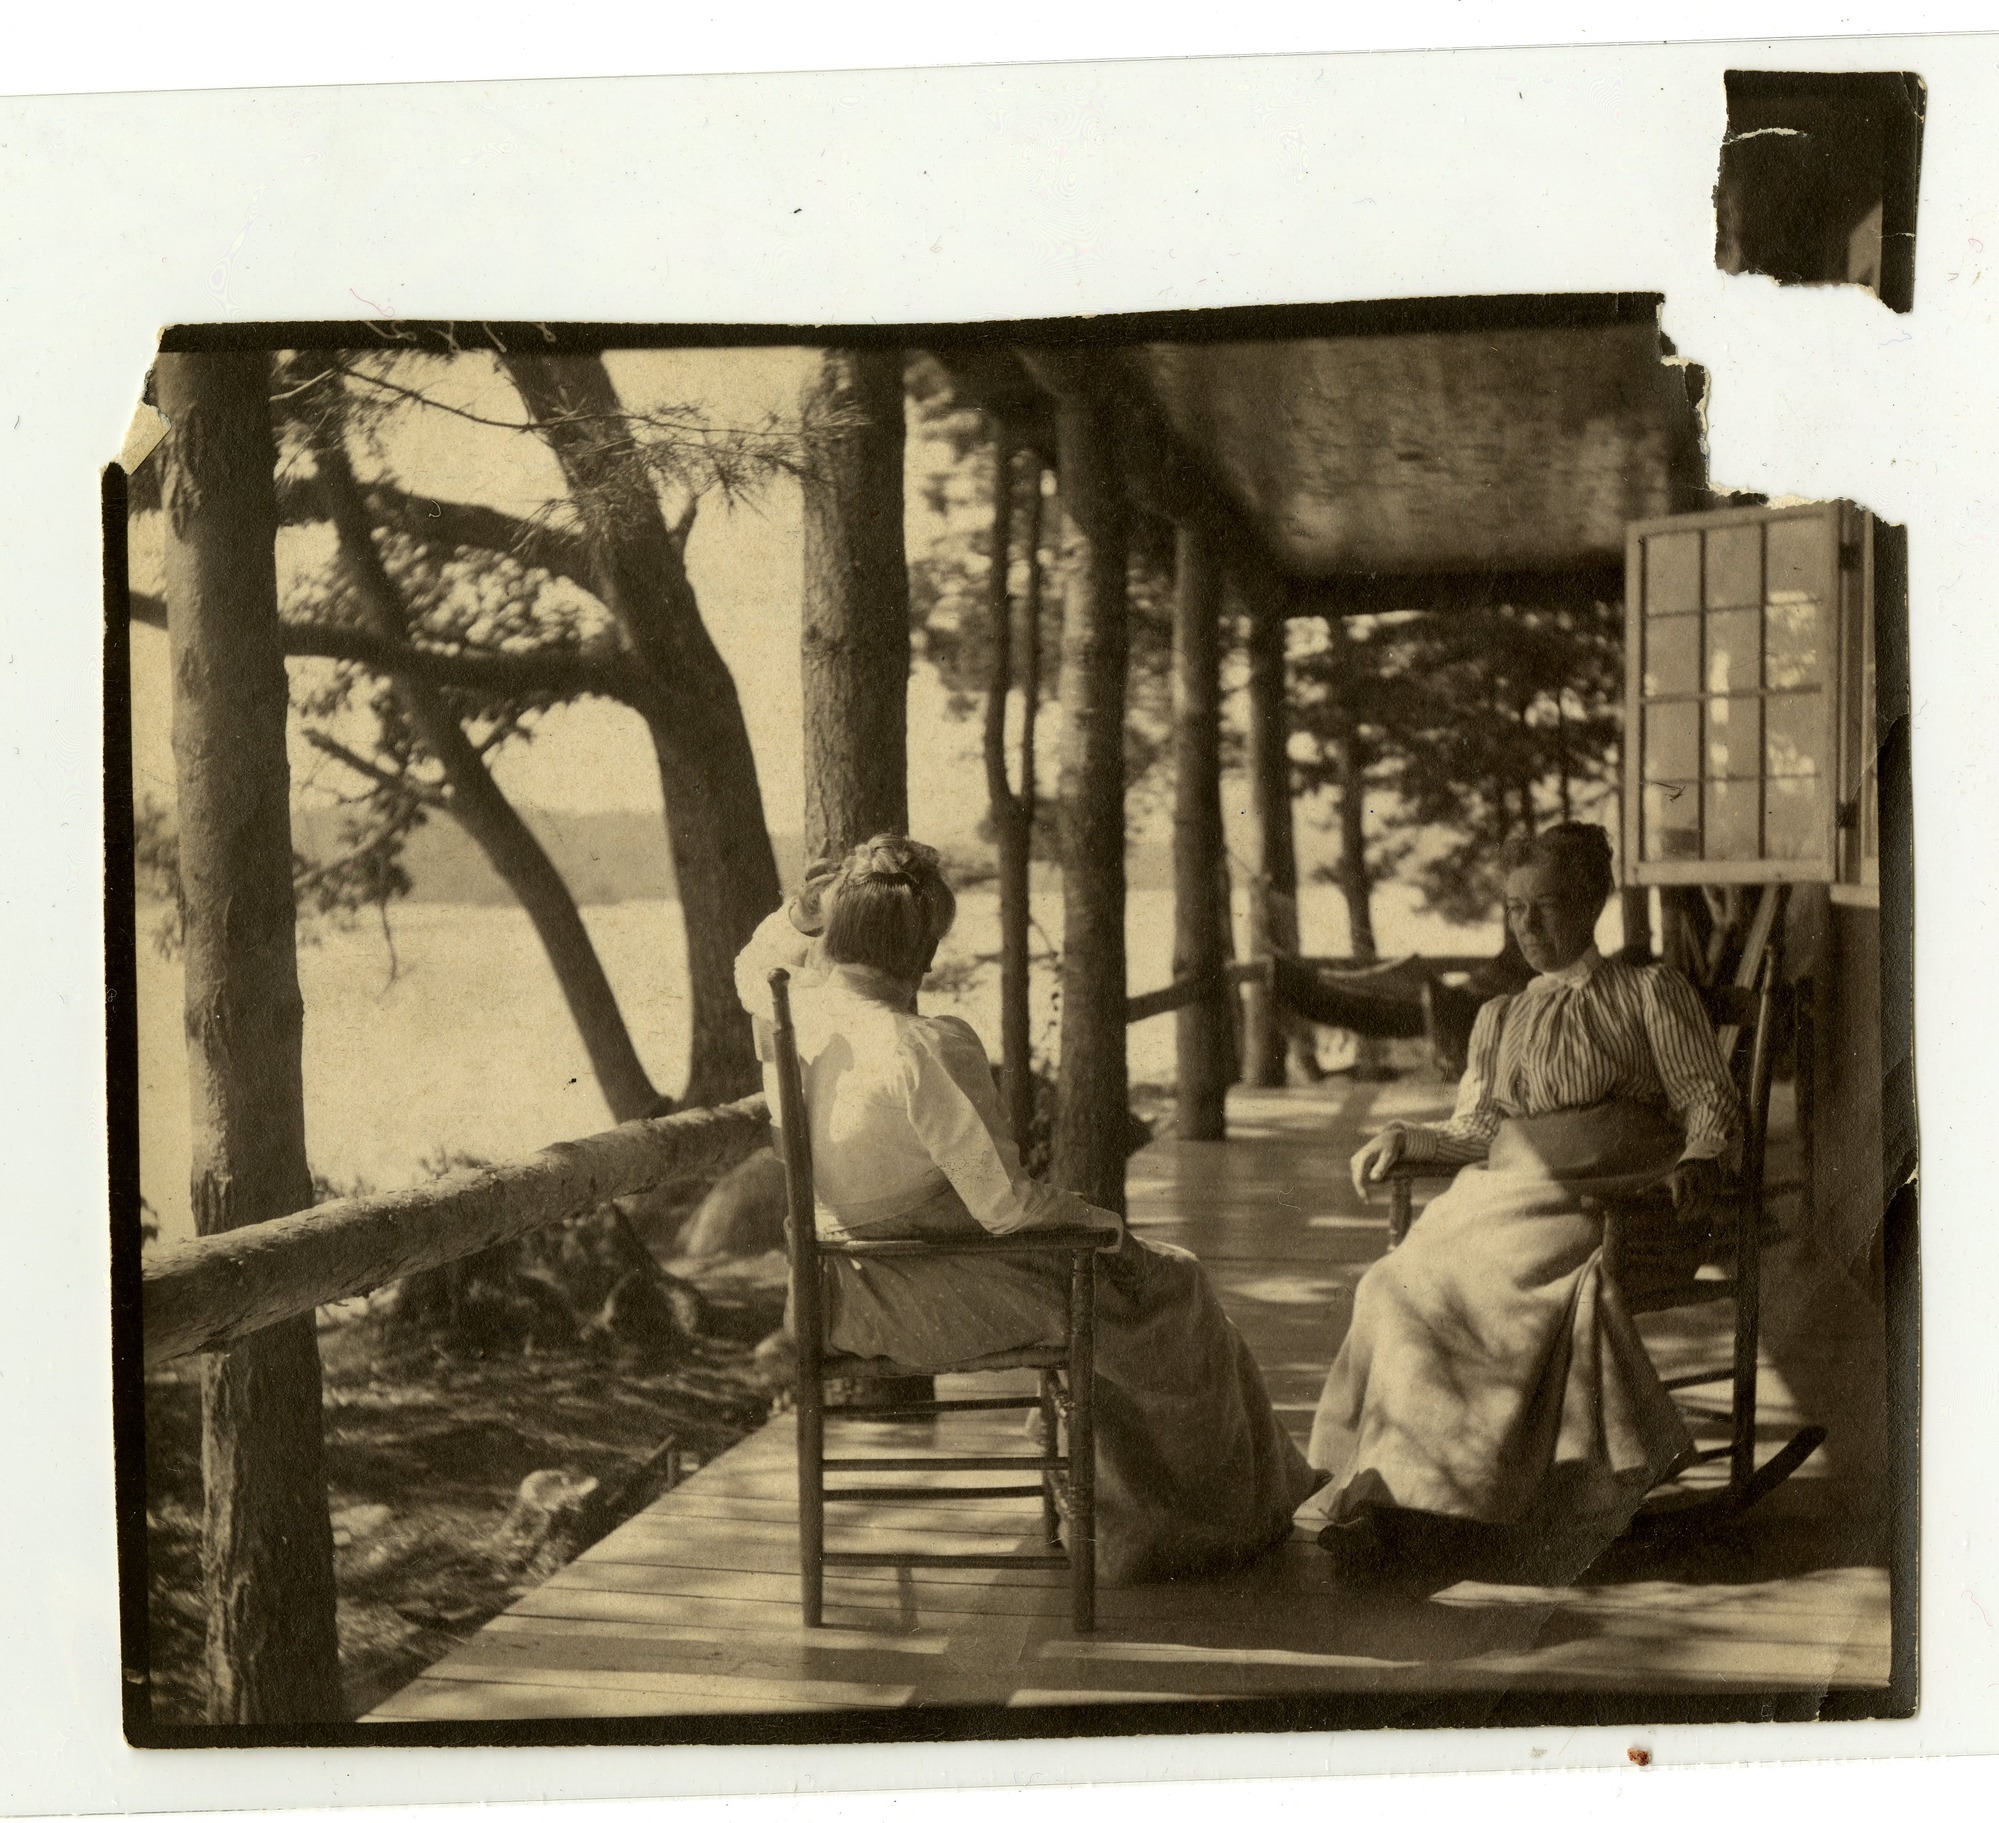 Two women seated on long rustic porch, looking over lake. One woman faces towards the camera in a rocking chair, the other faces away.